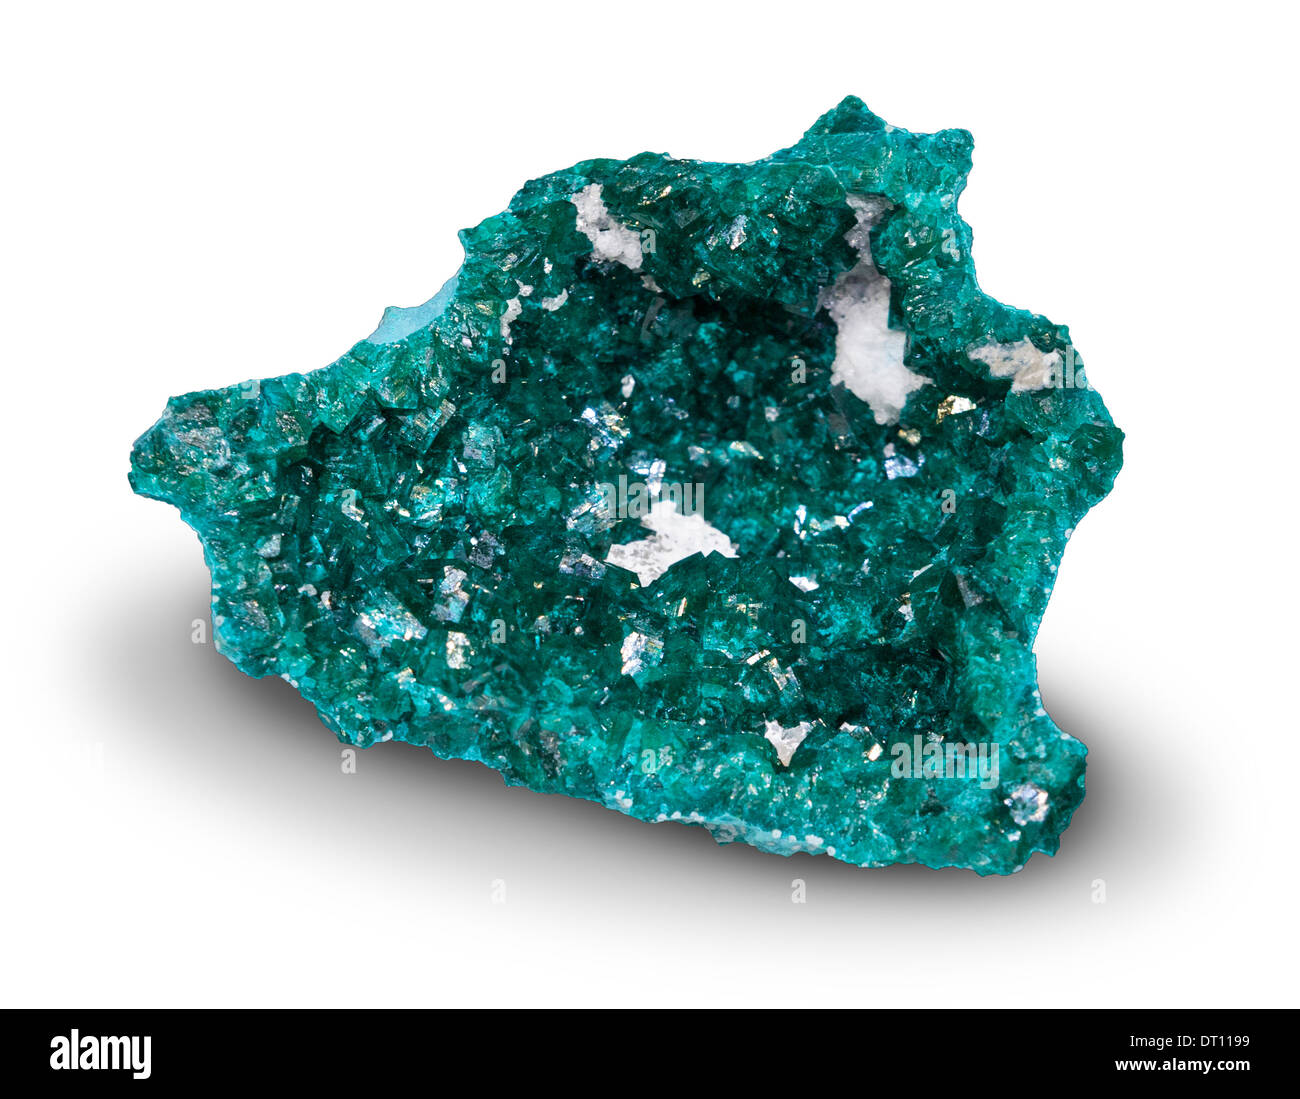 Dioptase is an intense emerald-green to bluish-green copper cyclosilicate mineral. It is transparent to translucent. Stock Photo